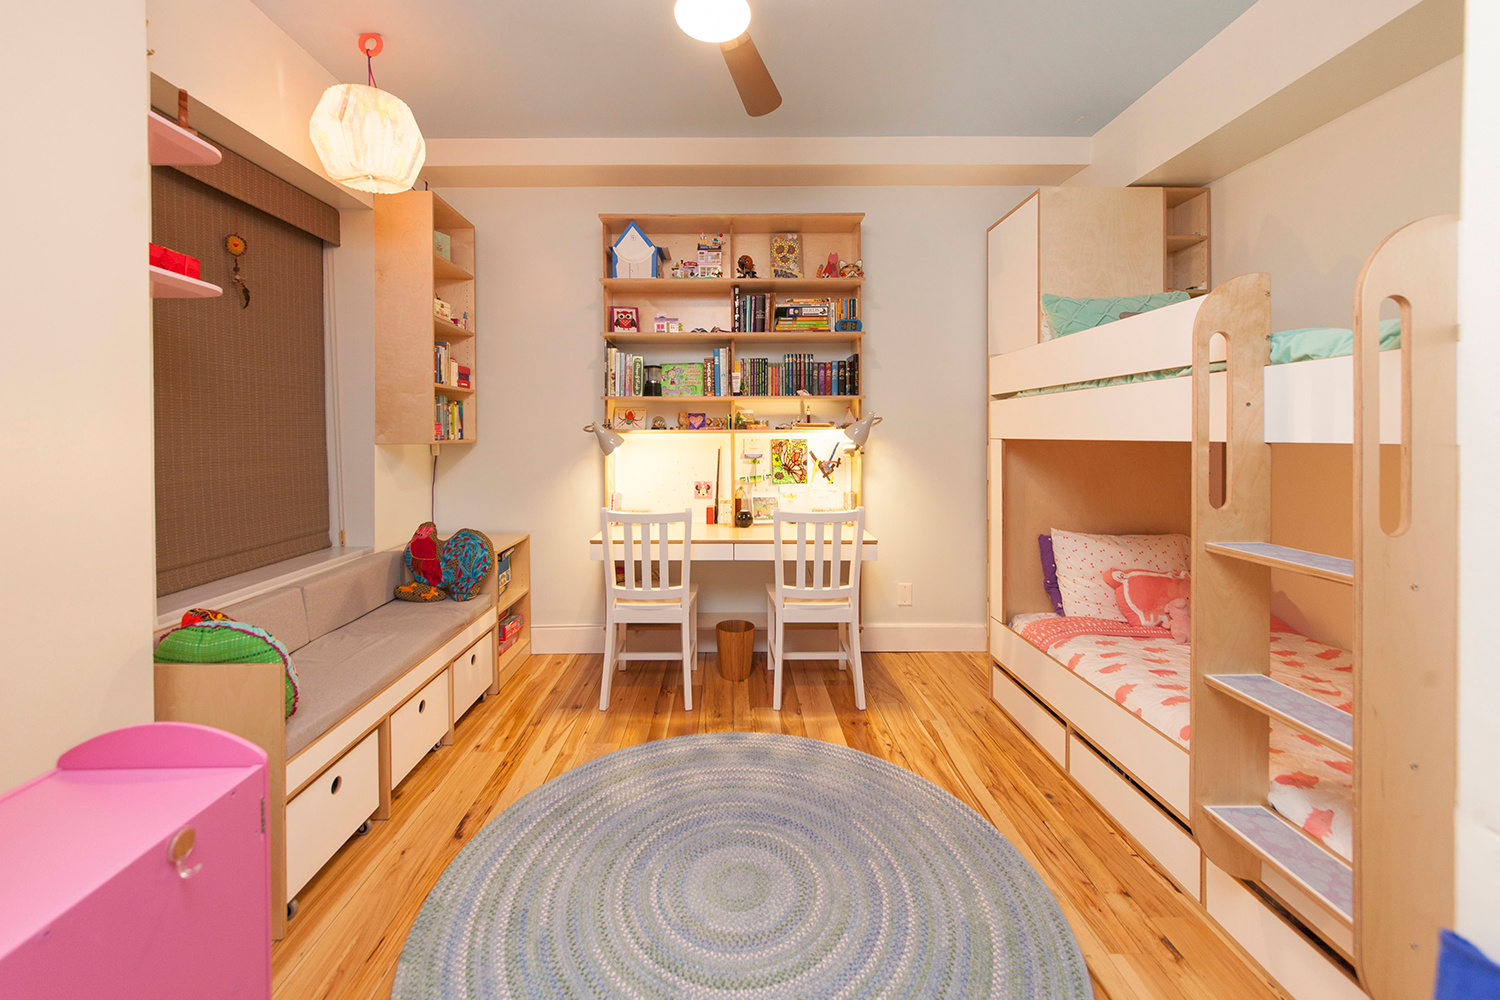 Cozy children’s room with bunk beds, bookshelves, study area, and colorful decor.